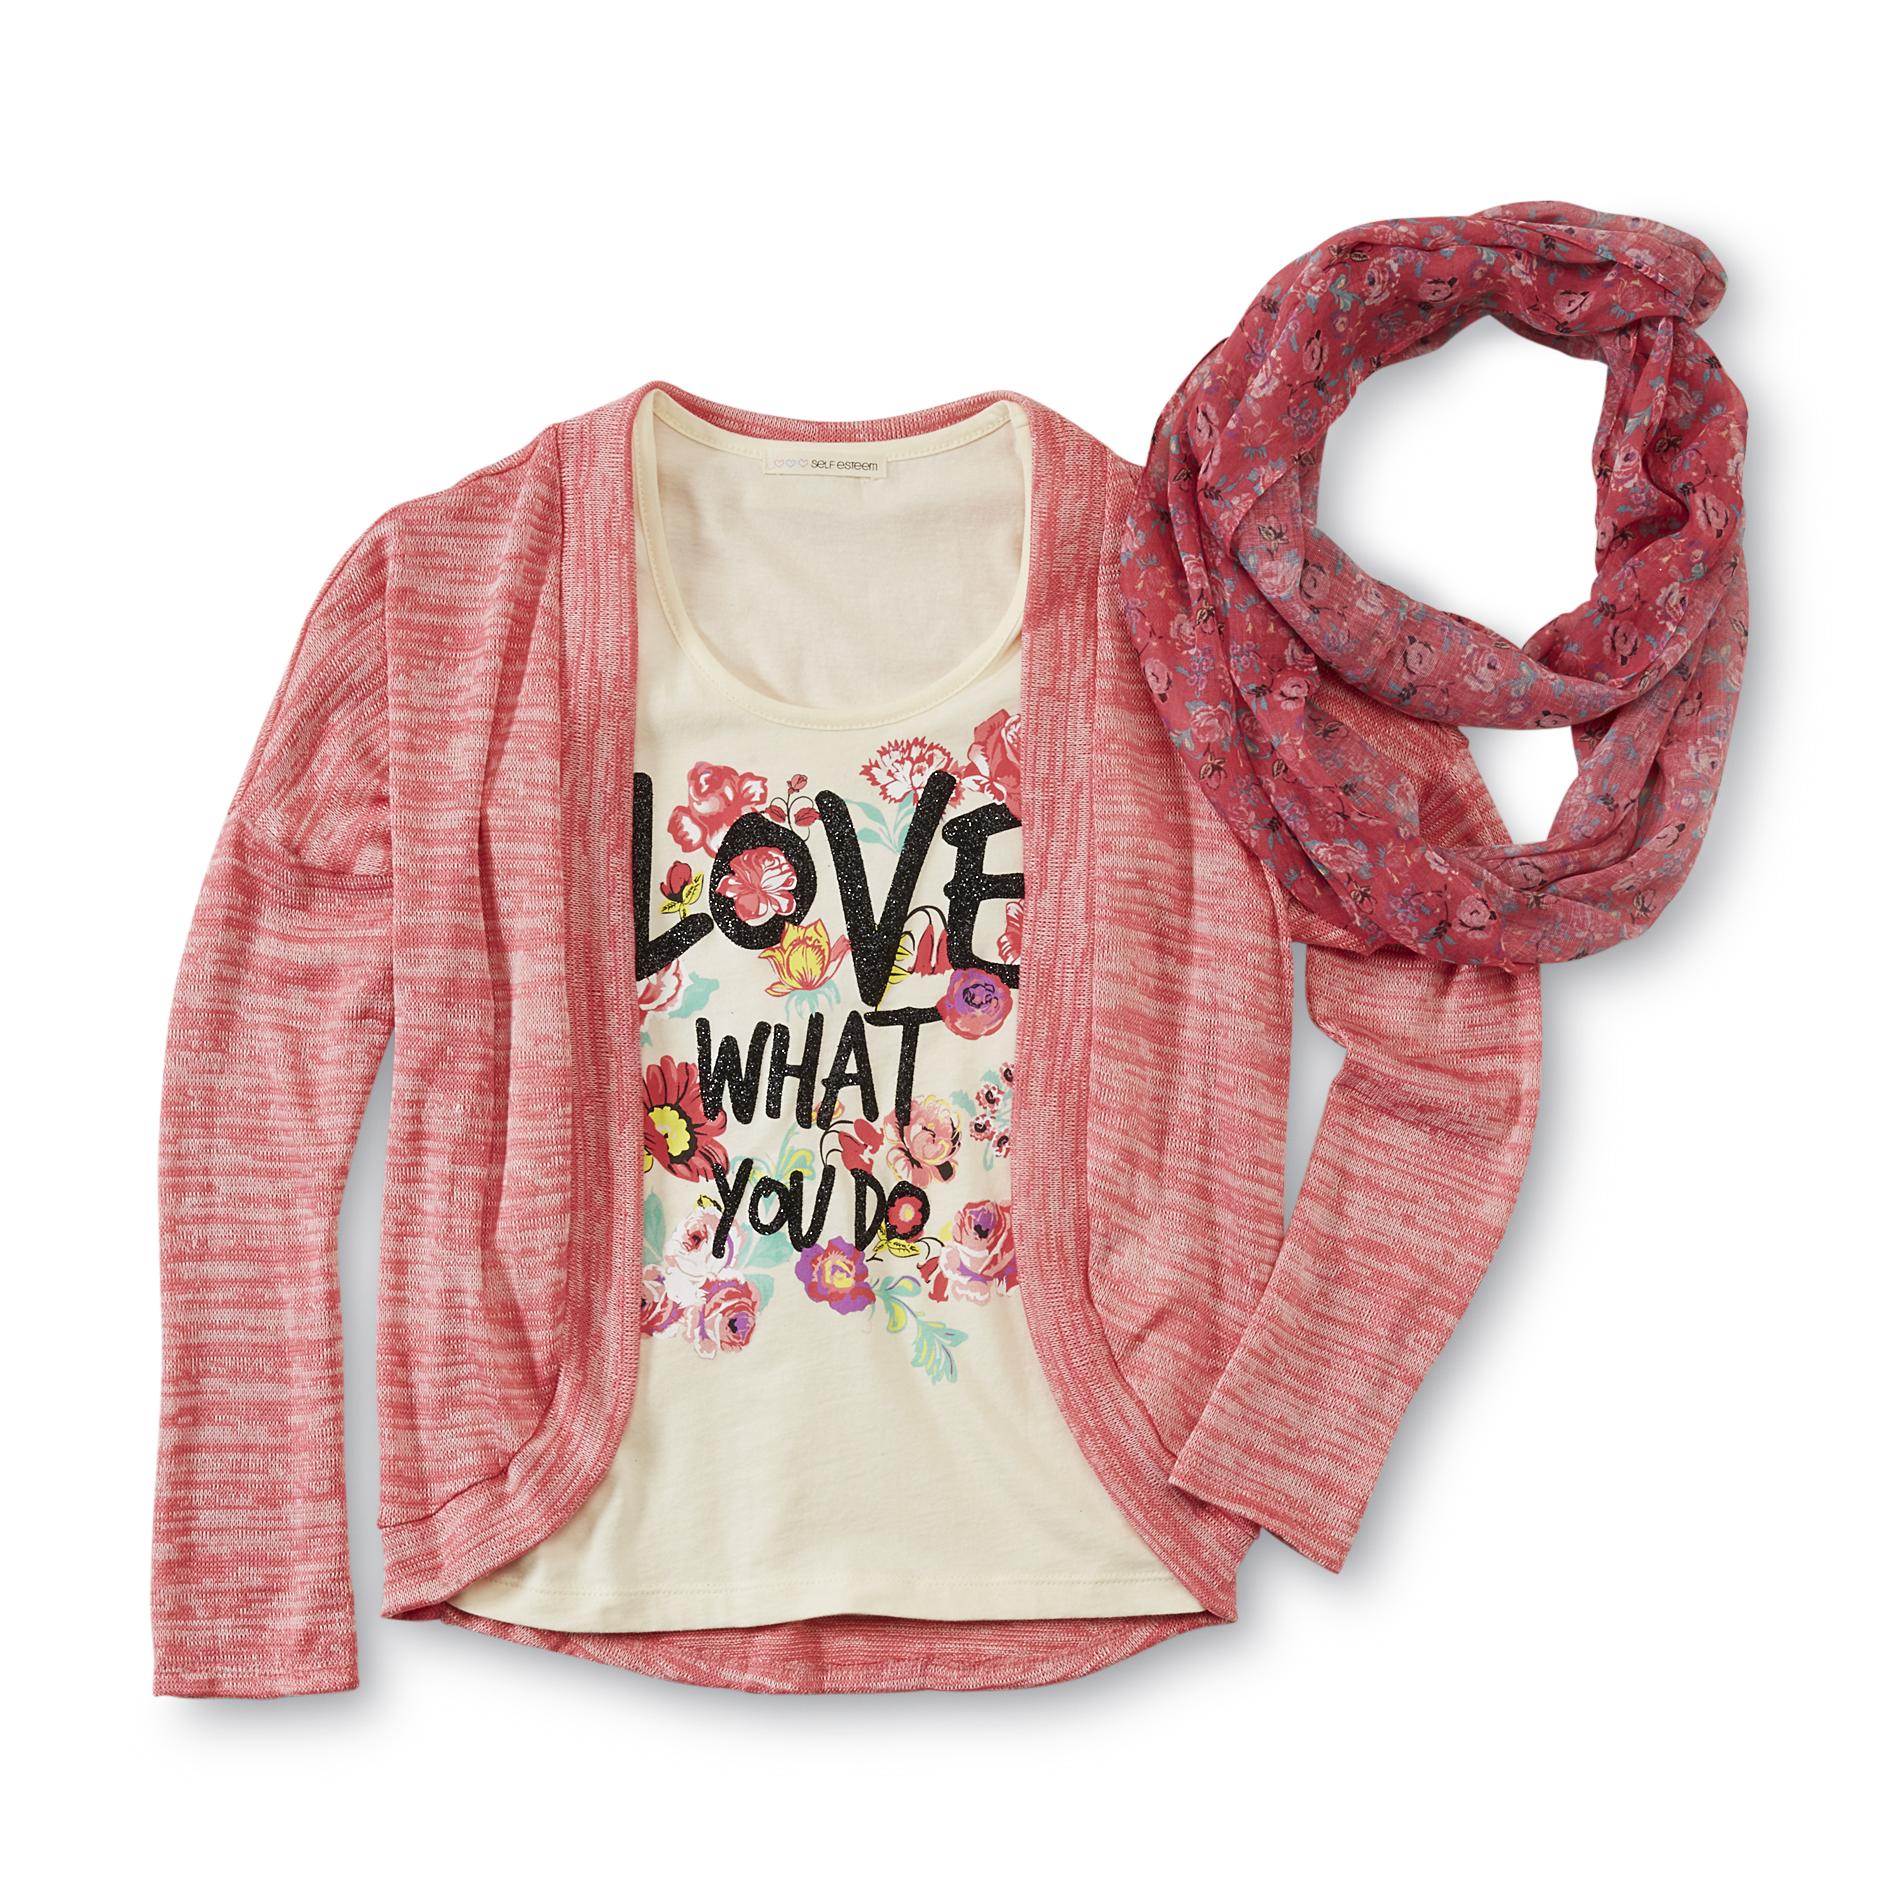 Self Esteem Girl's Graphic Tank Top  Cardigan & Infinity Scarf - Love What You Do